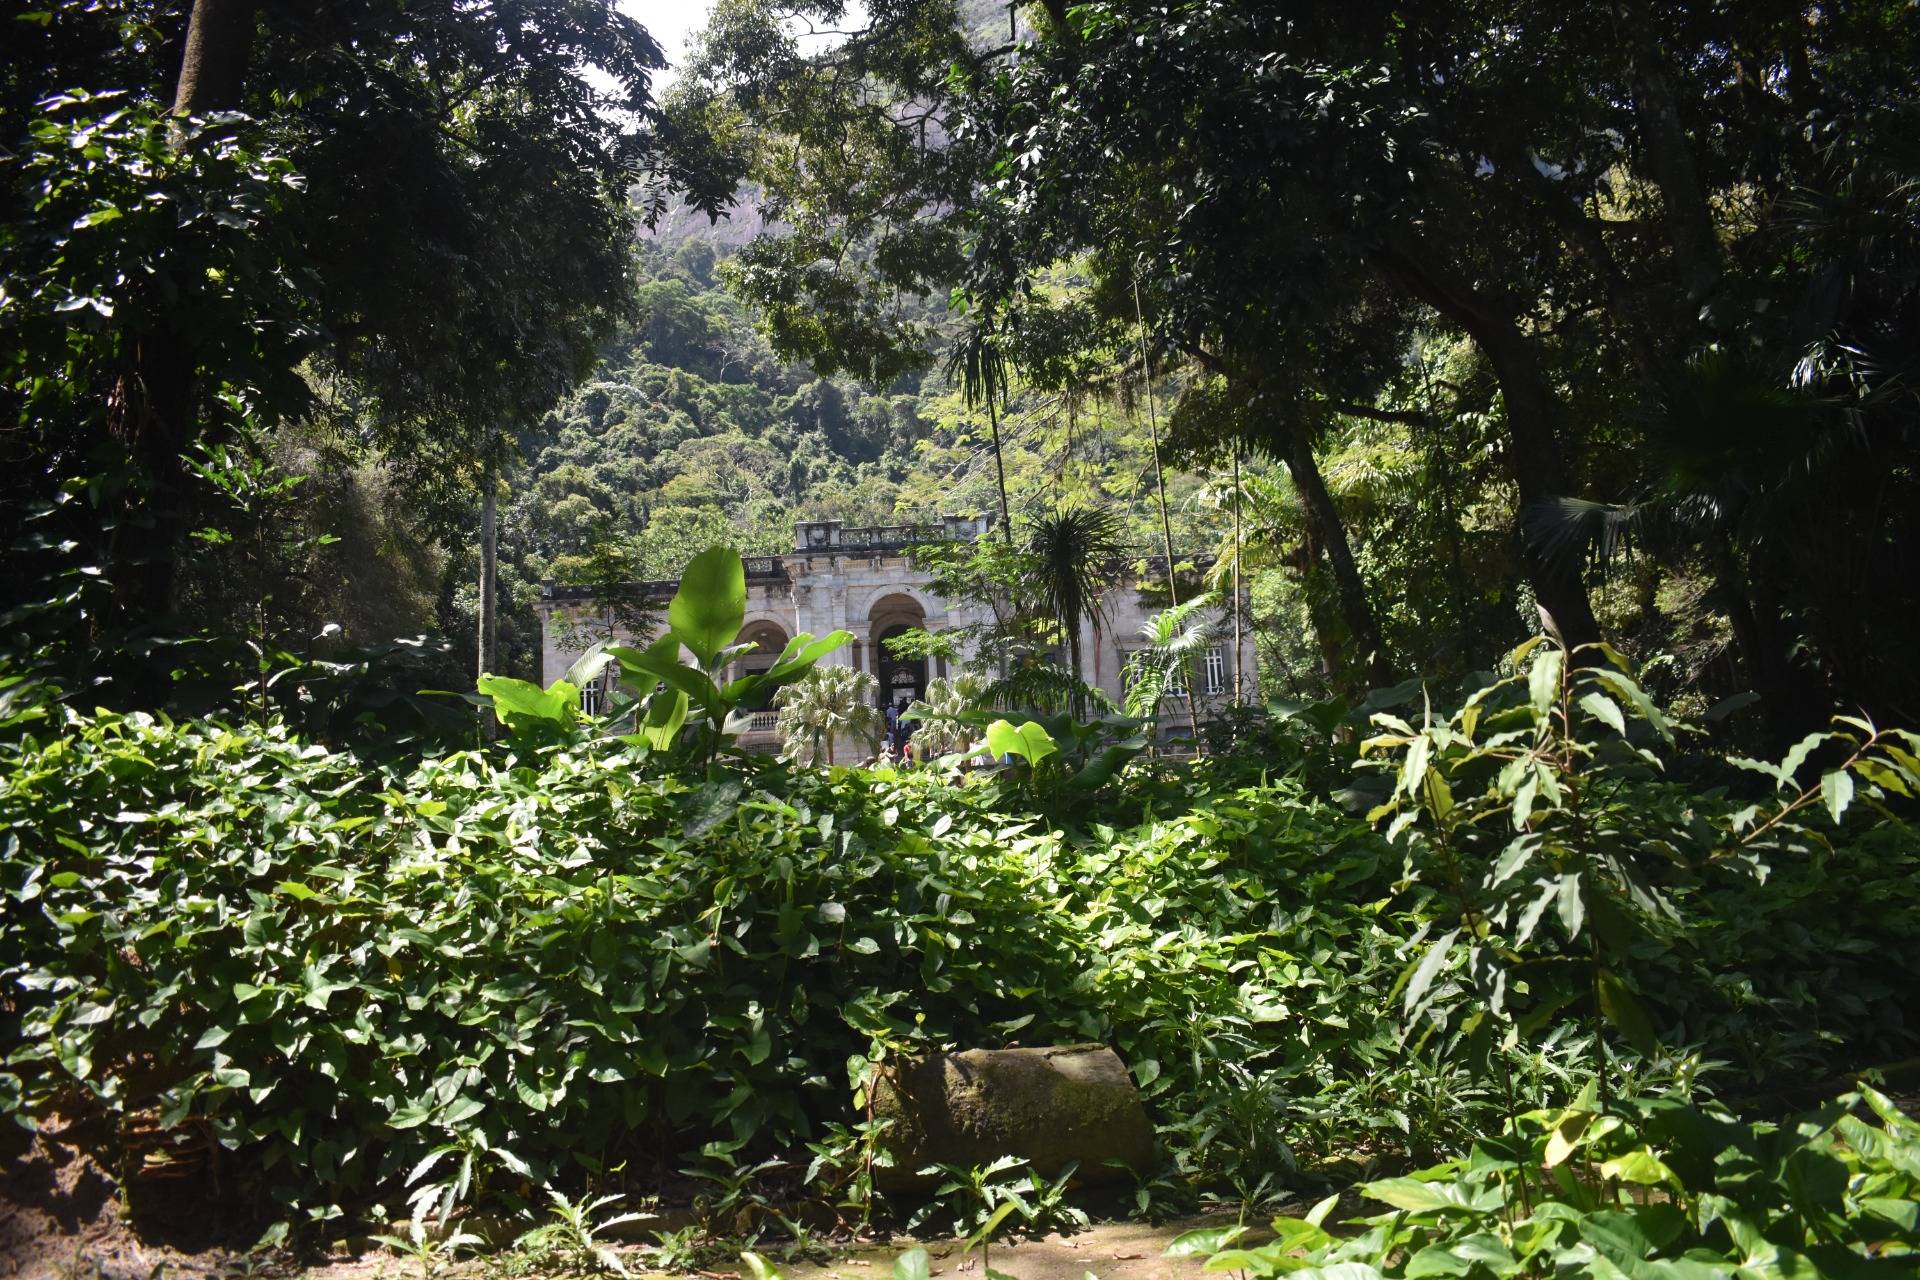 The famous Palacete (”small palace”) inside the nature